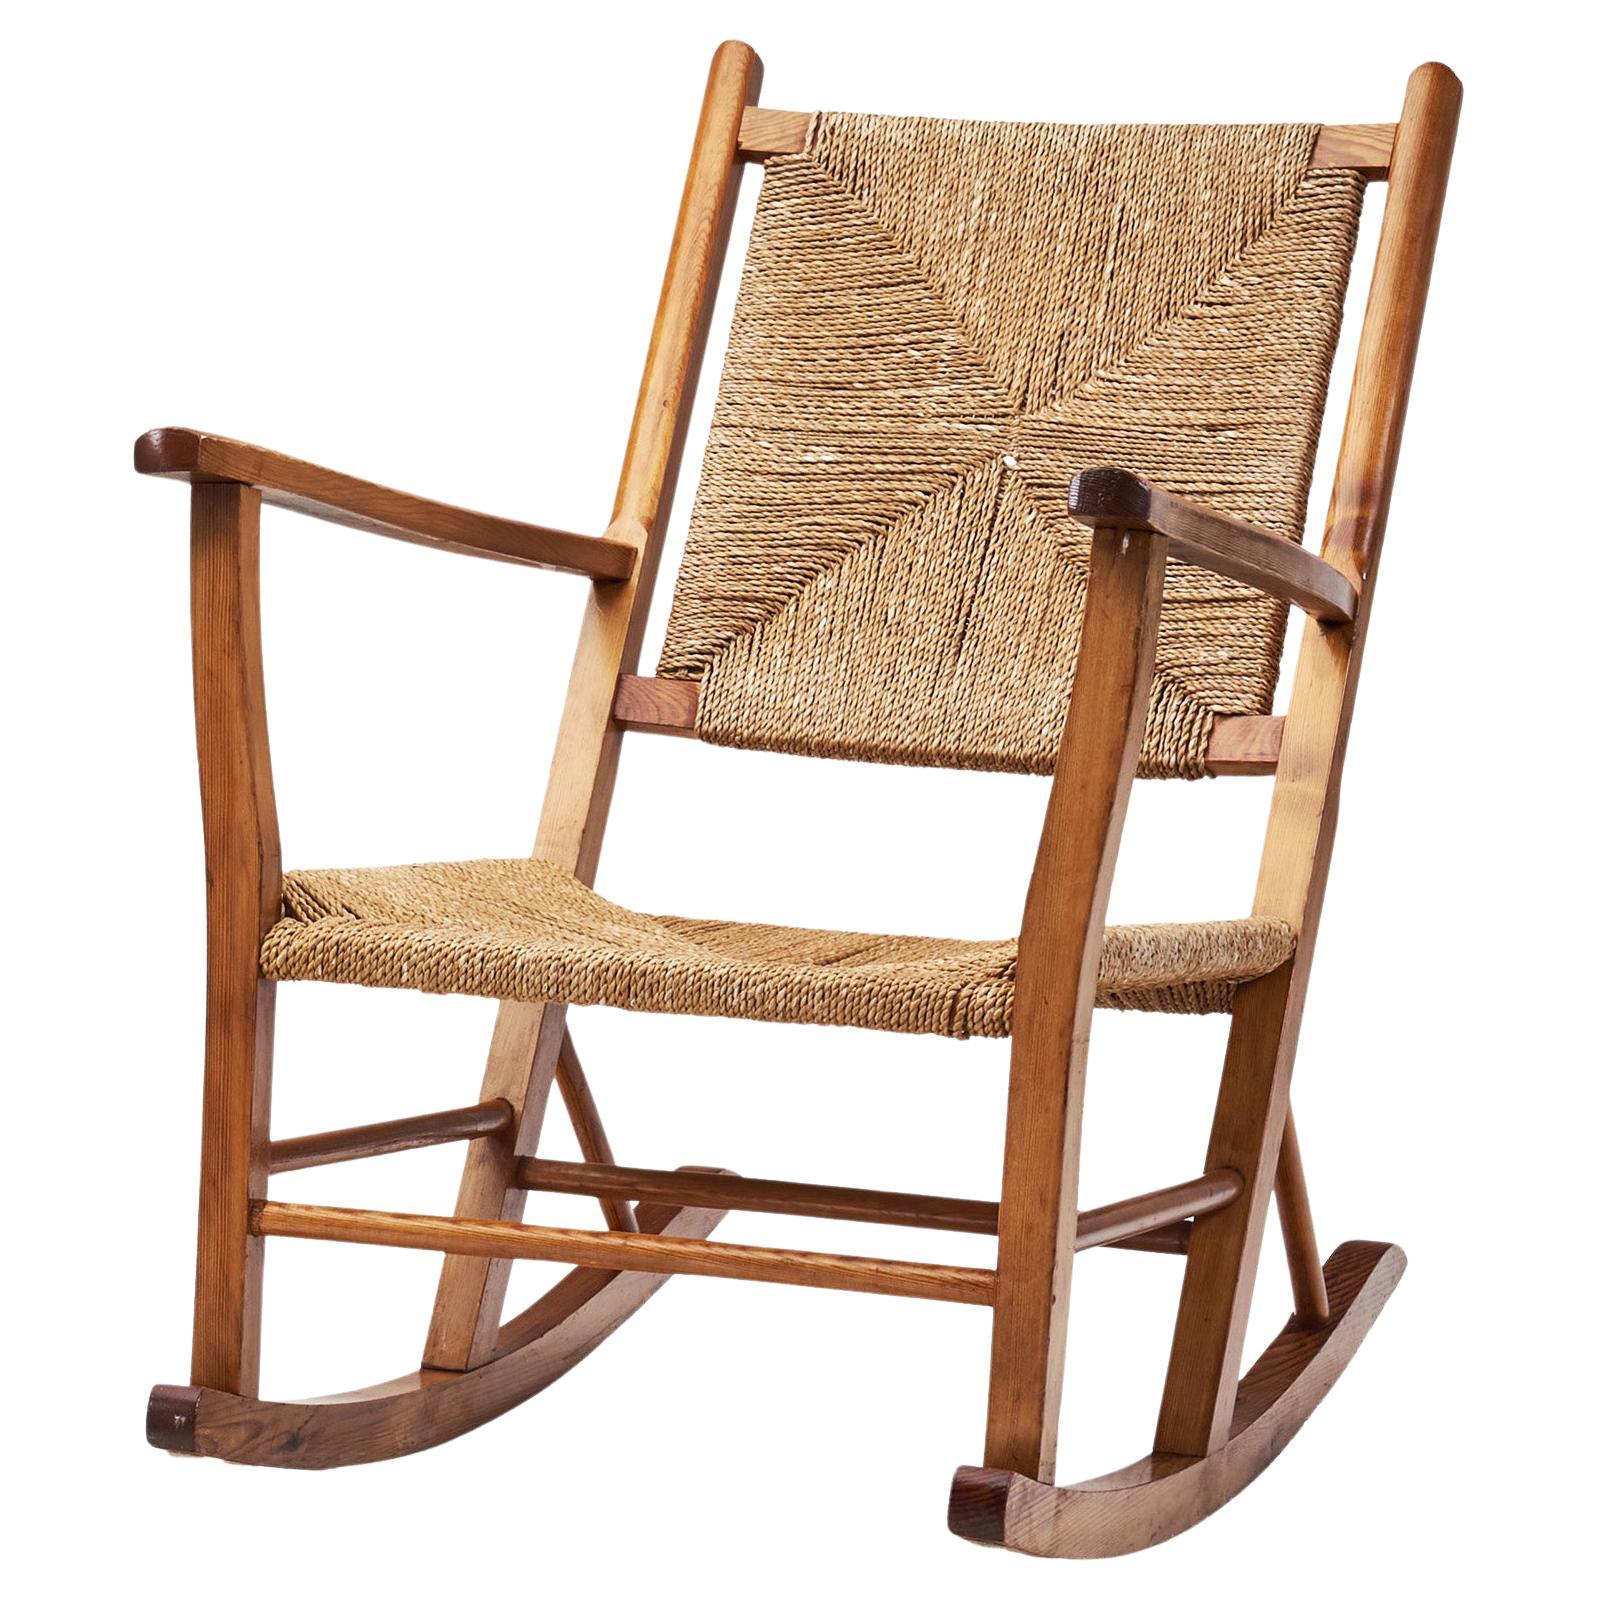 Norwegian Wood and Papercord Rocking Chair by Slåke Møbelfabrik, Norway 1940s For Sale